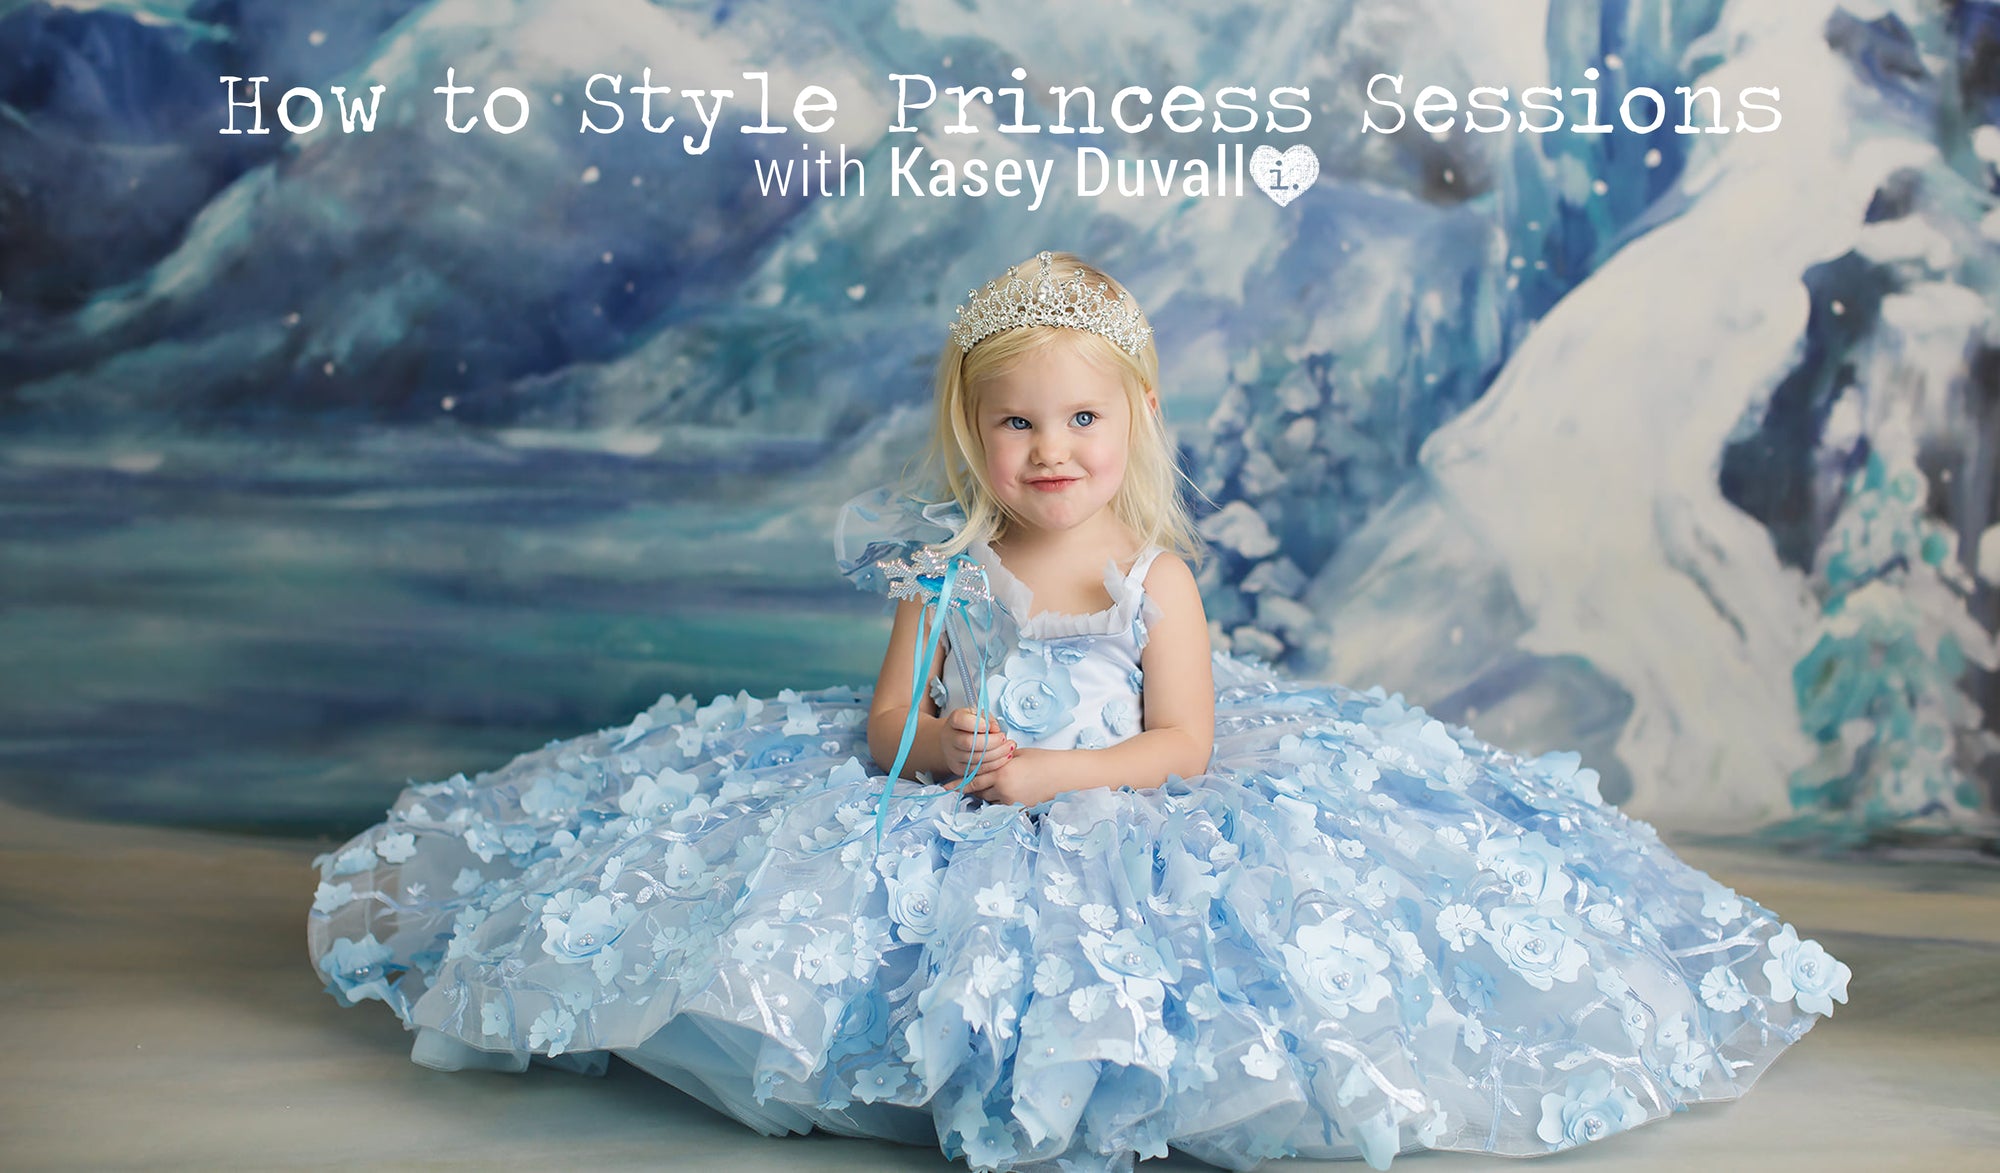 How to Style Princess Sessions with Kasey Duvall